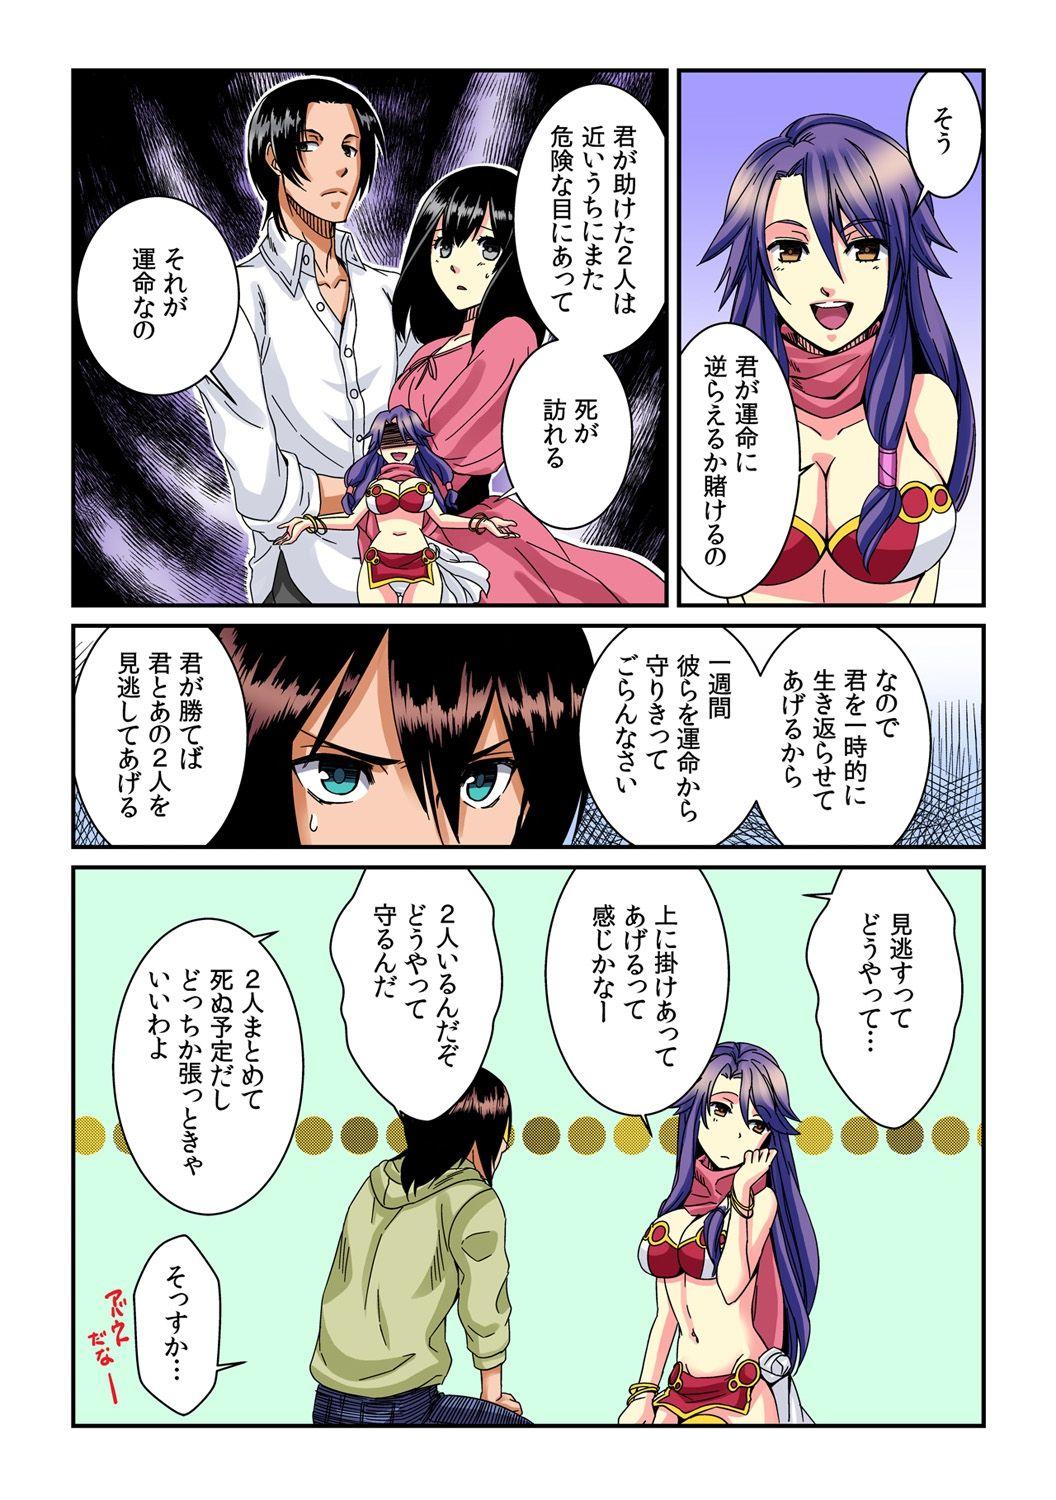 [Akagi Gijou / Akahige] I became a girl- and I definitely can't let anyone find out! (Full color) 1 5